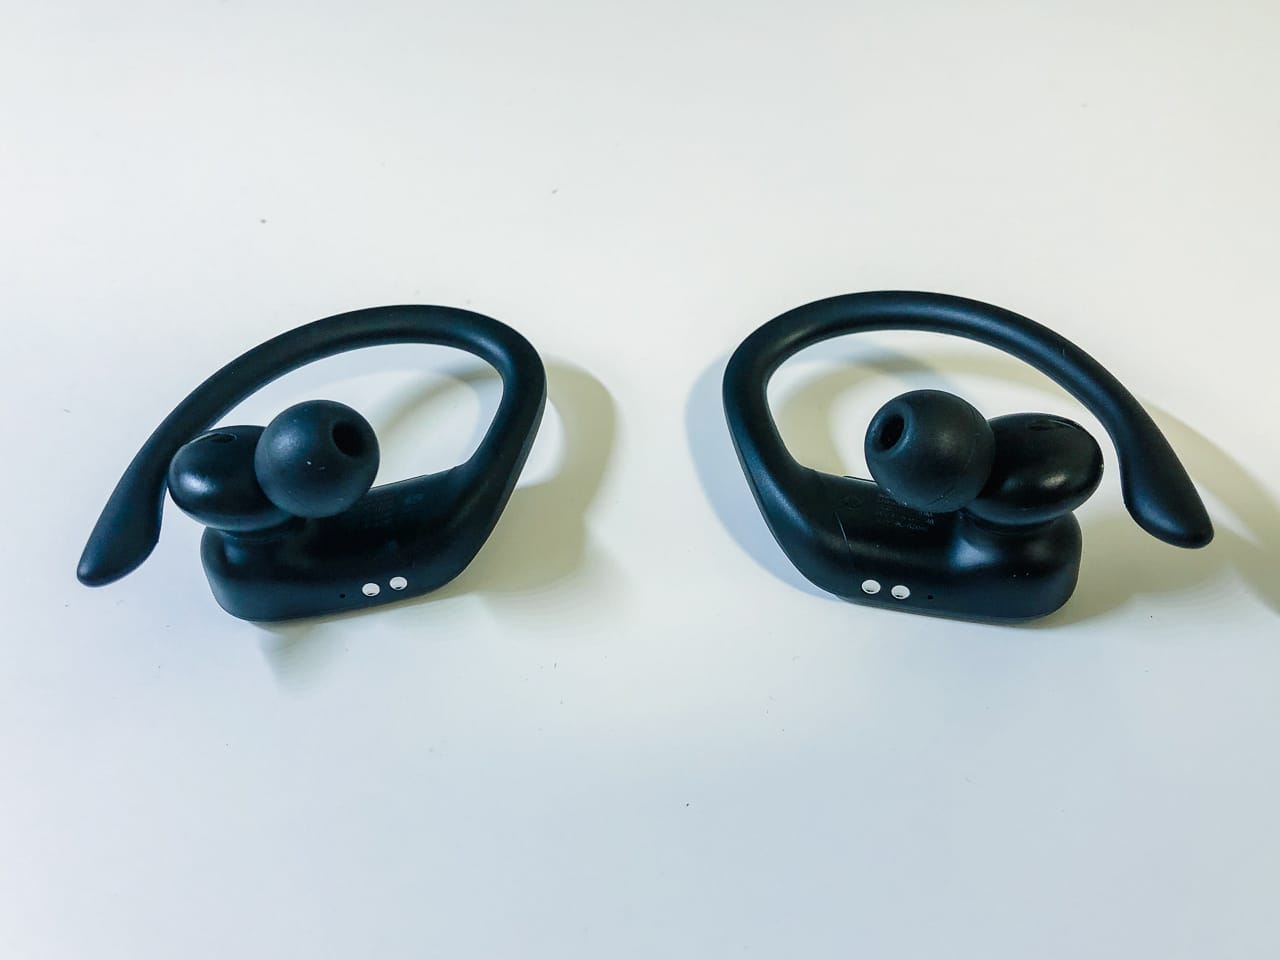 A Review Of The Powerbeats Pro Totally Wireless Headphones The